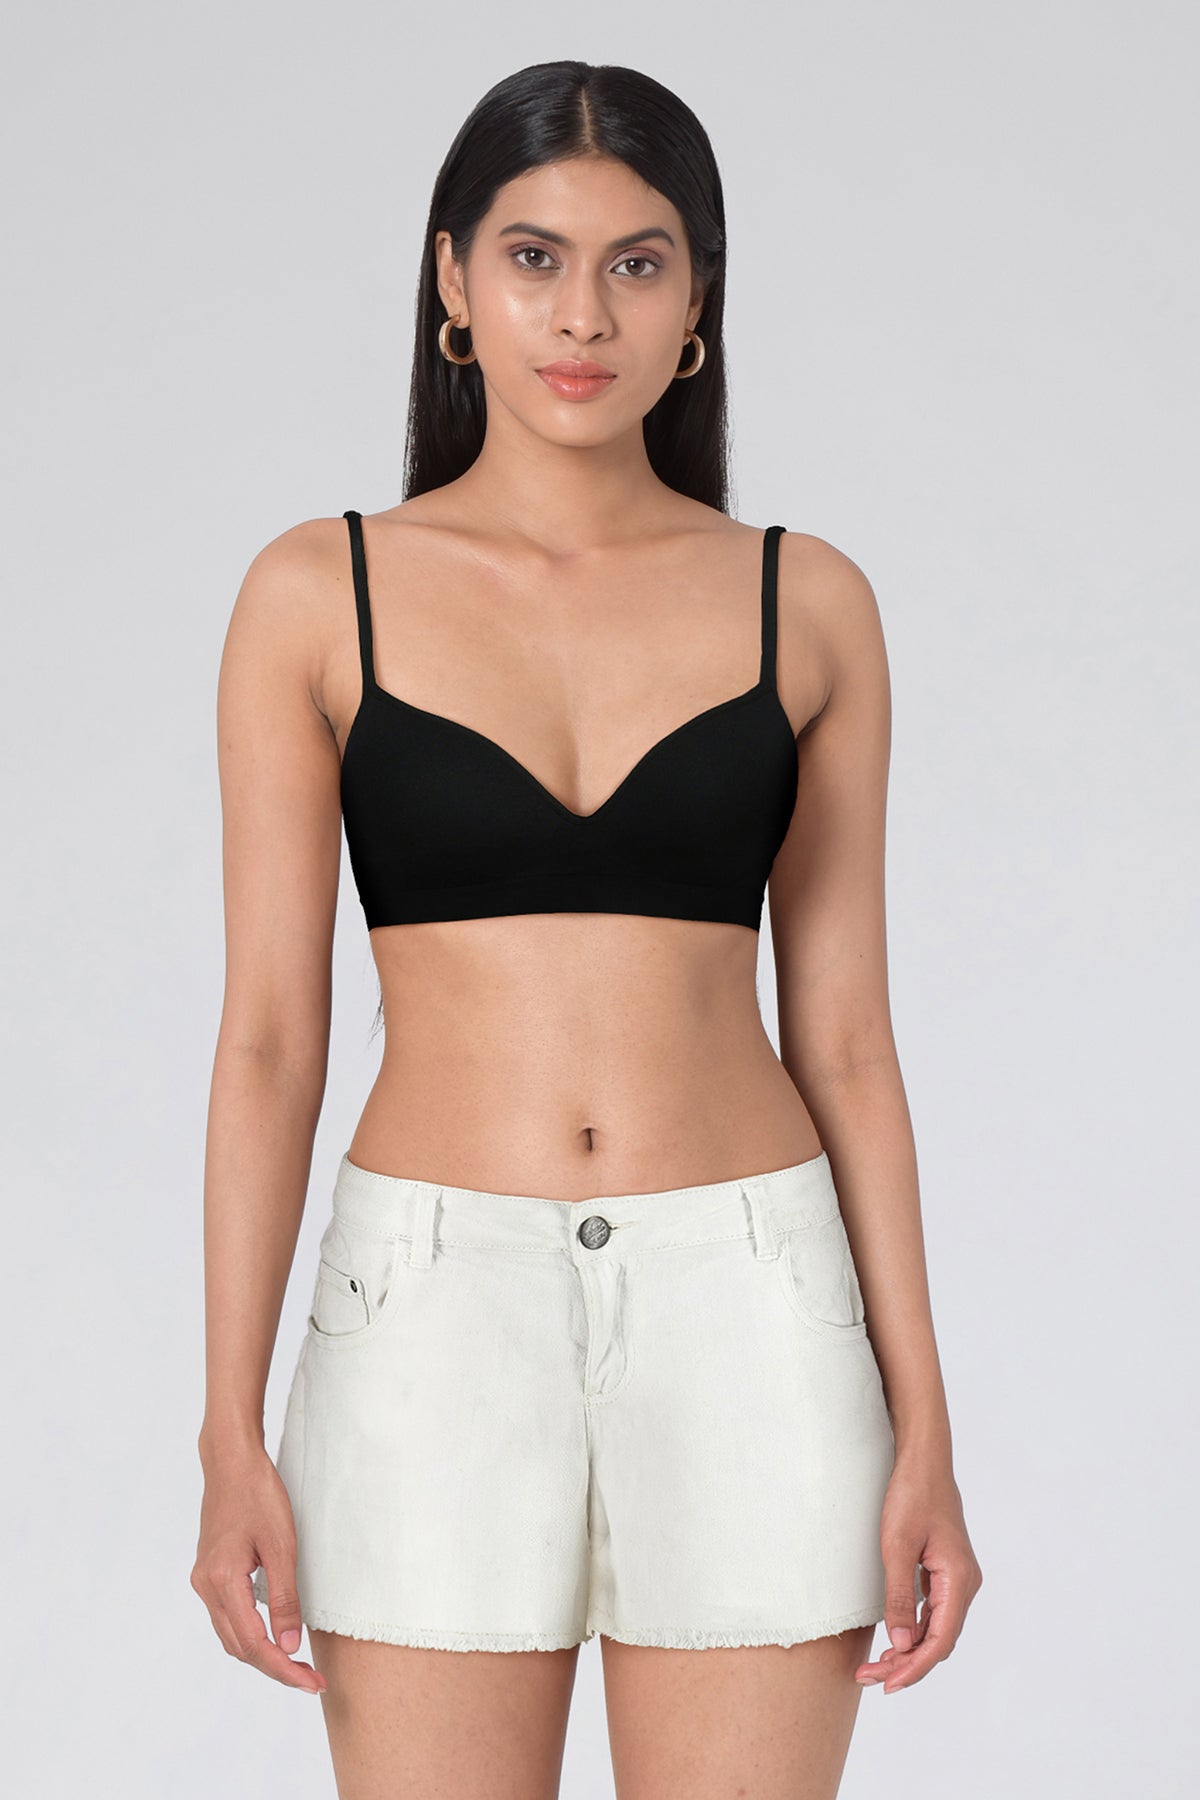 Hundreds of shoppers are adding this super soft non-wire bra to